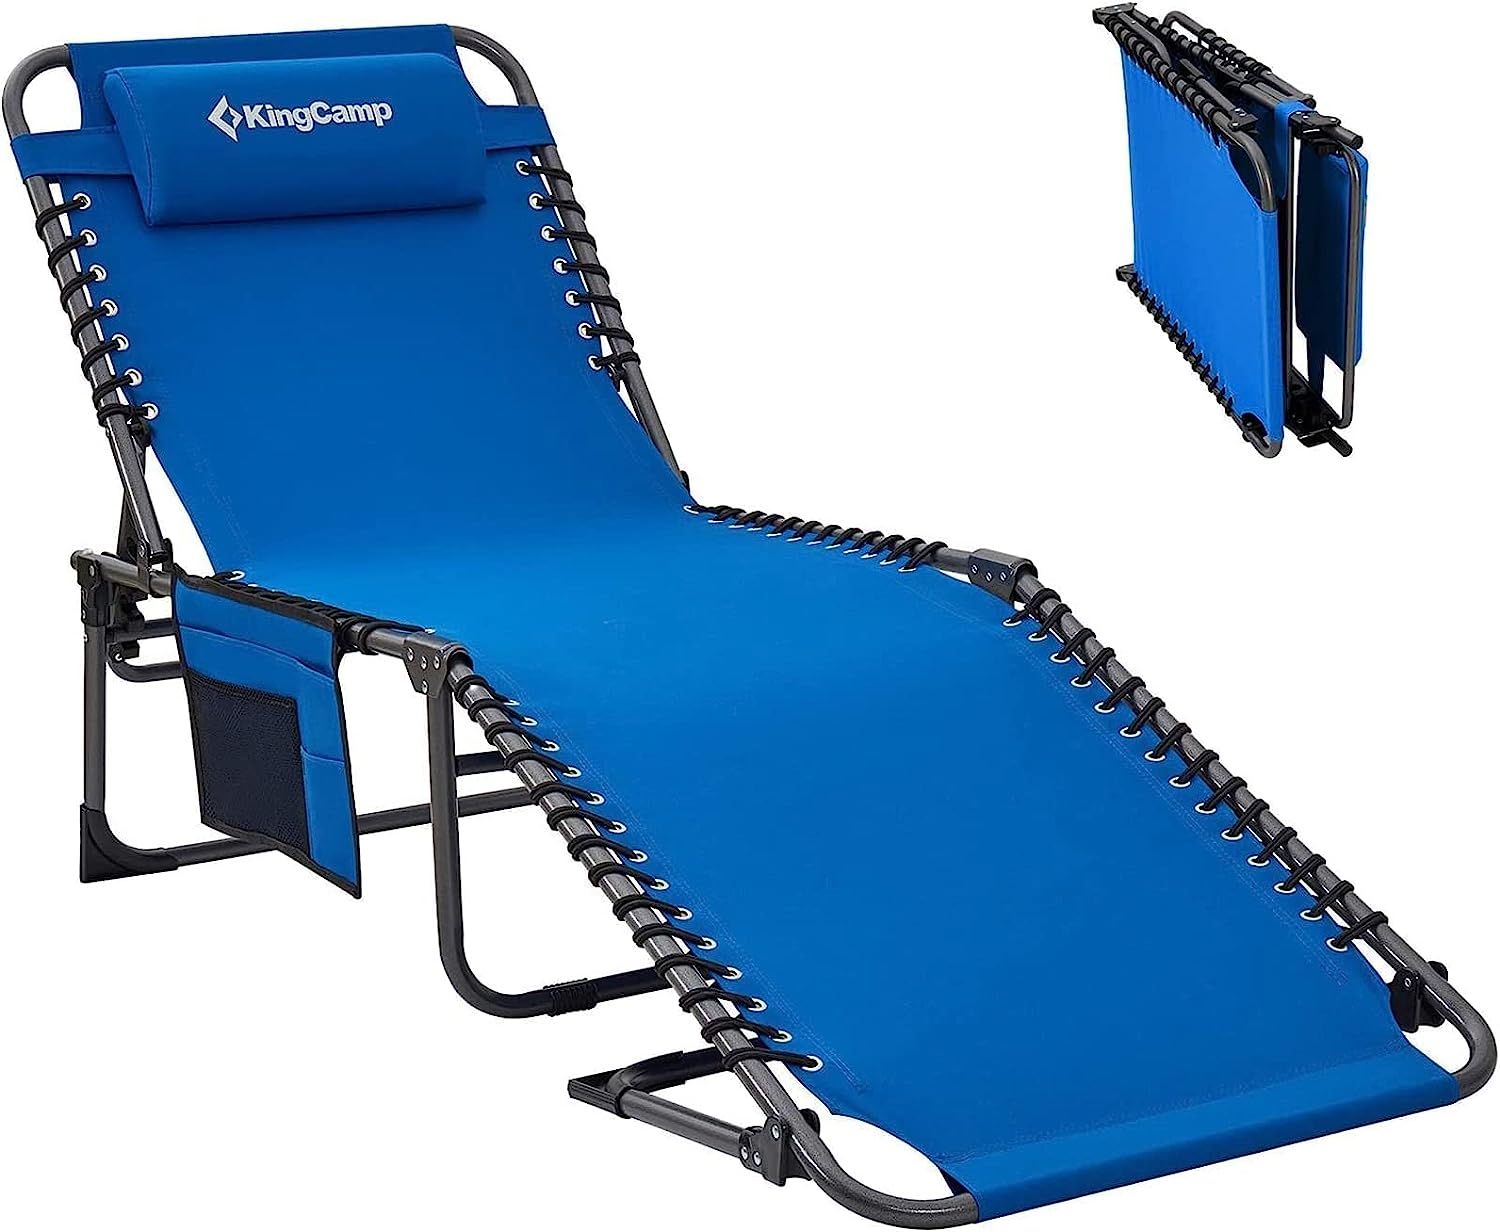 A blue folding chaise lounge, pictured both fully extended and folded down small and flat, with a pocket hanging from one arm